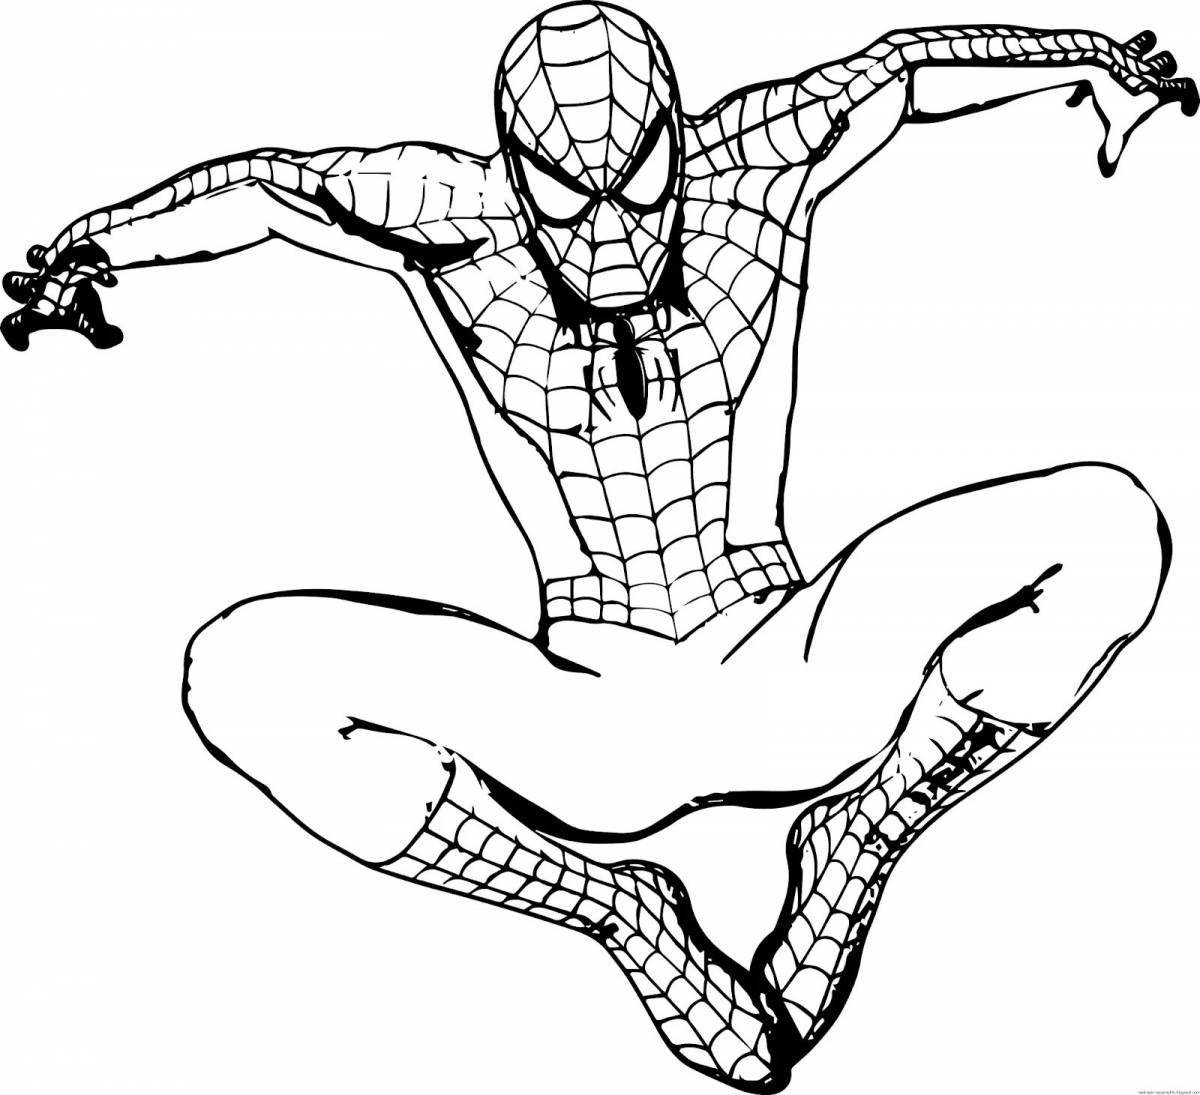 Colorfully detailed Spider-Man coloring page